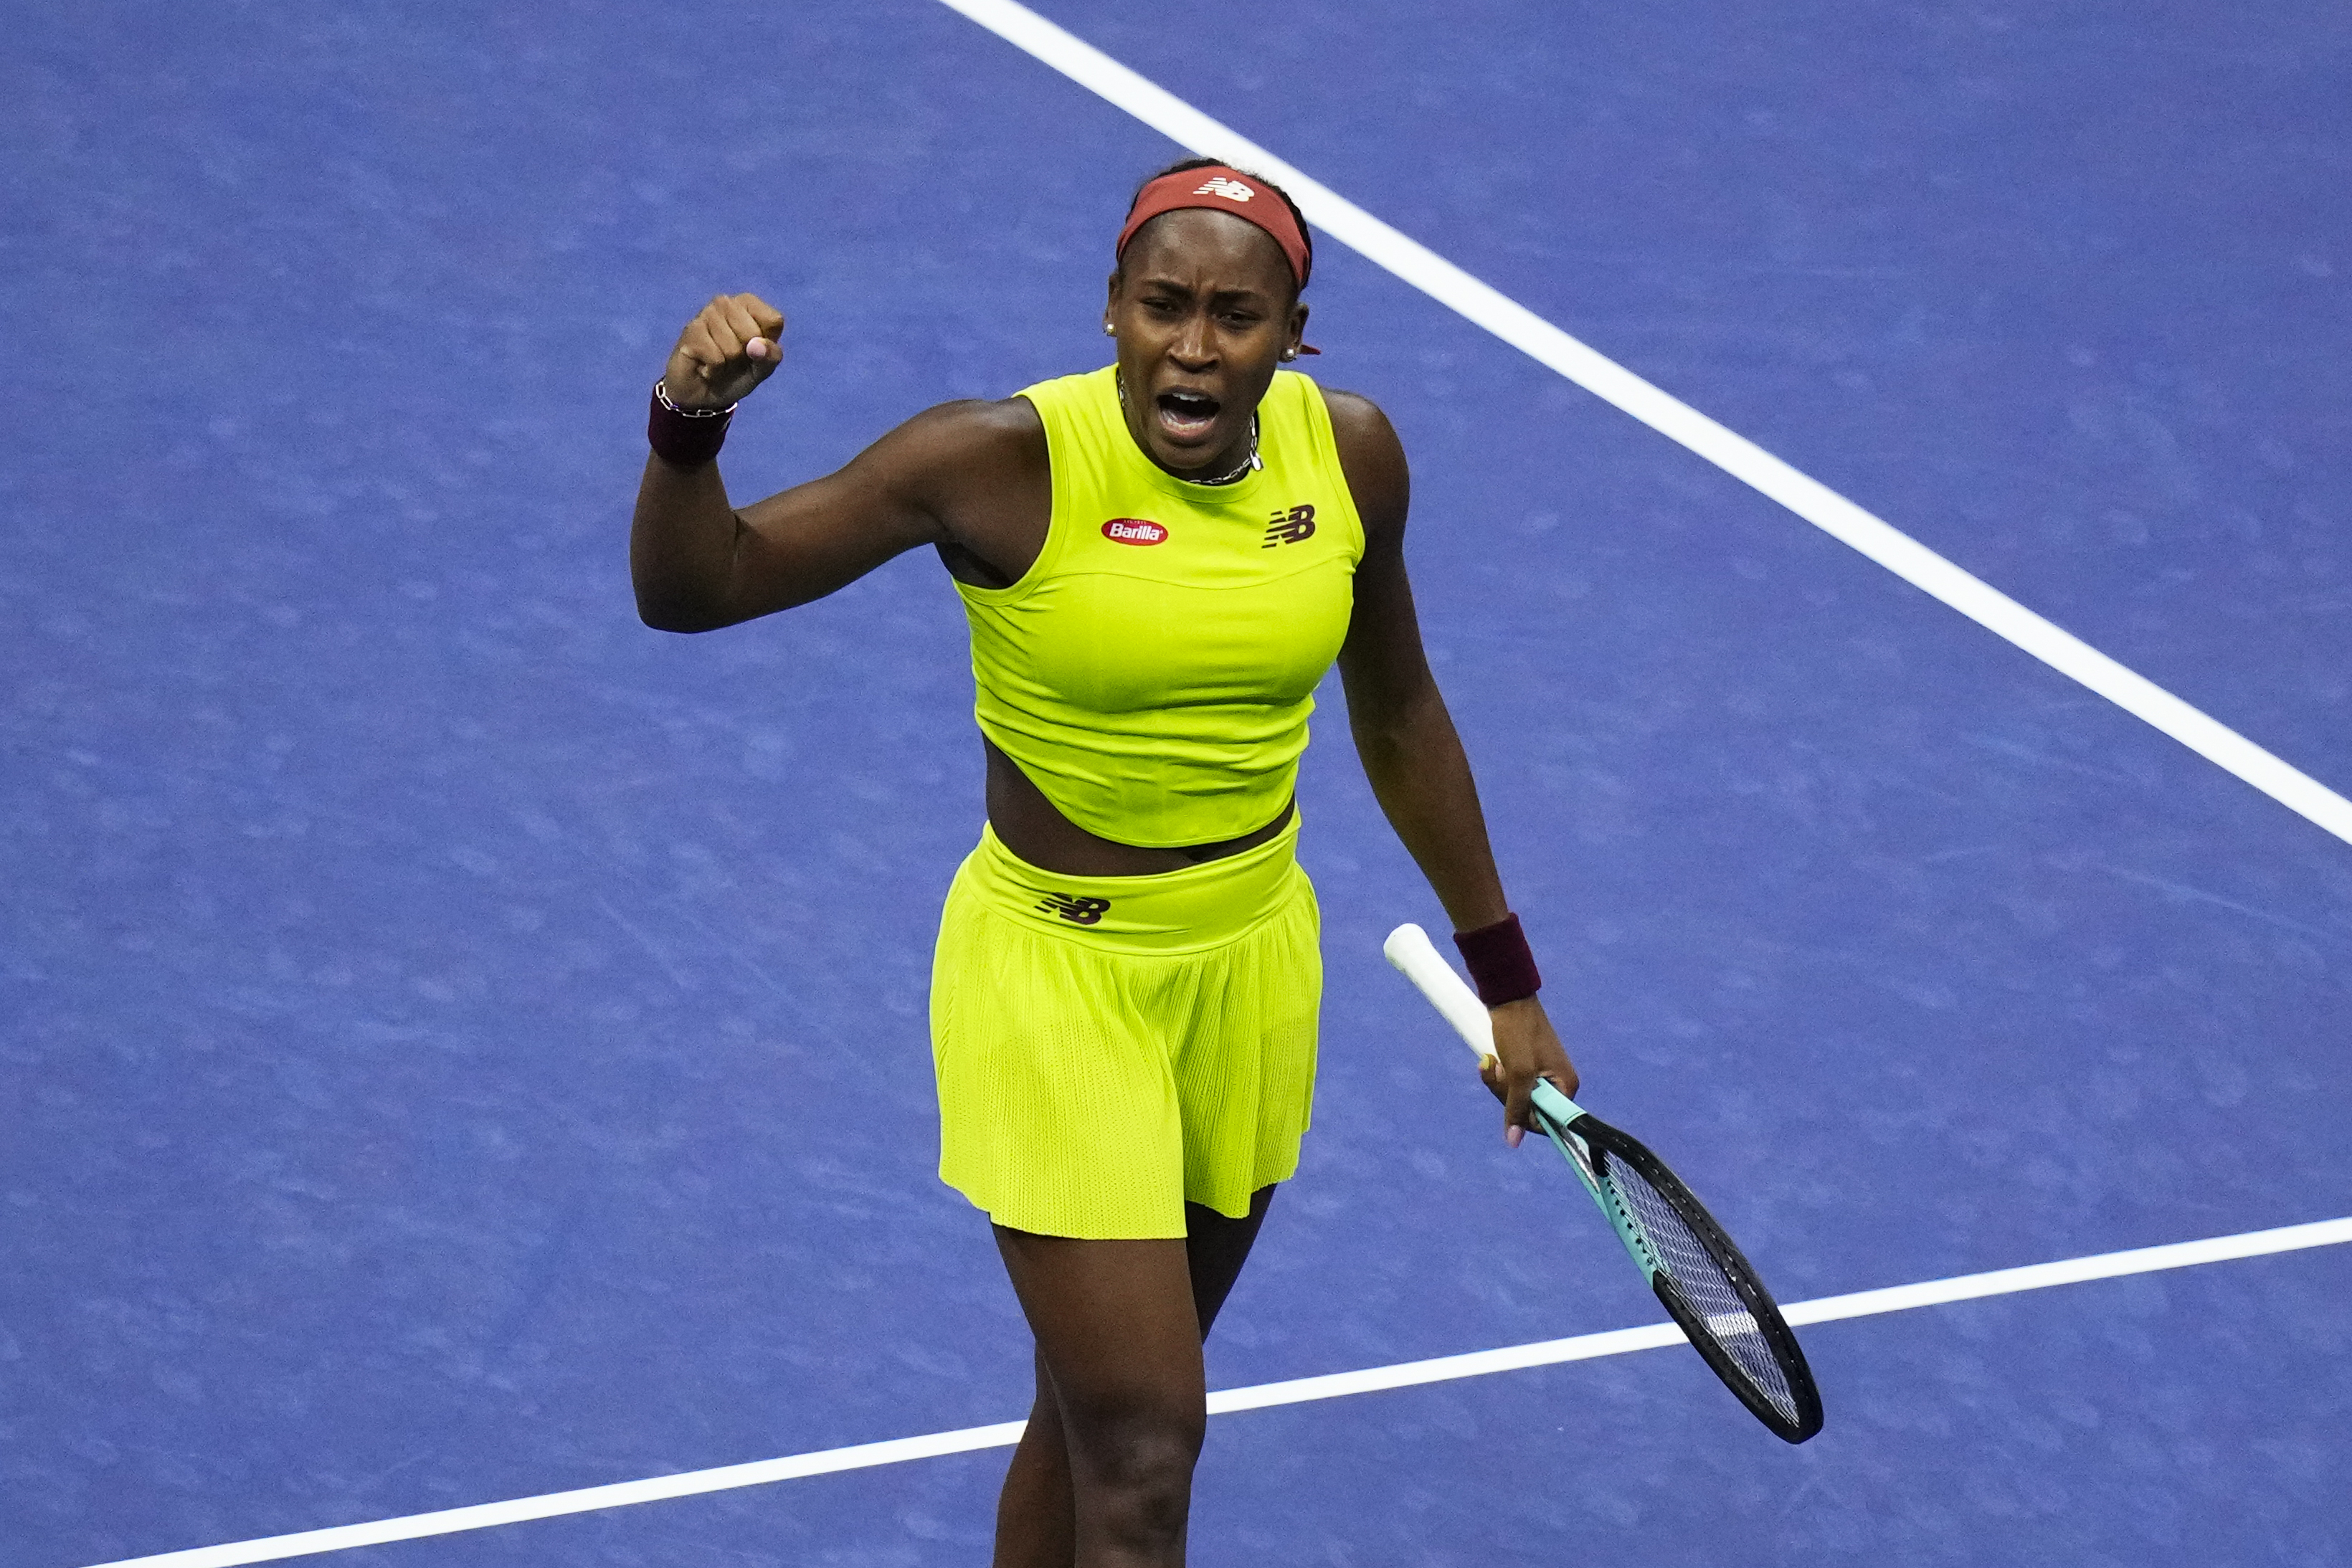 WTA LIVE RANKINGS. Gauff to hit career-high if she beats Trevisan in French  Open semifinal - Tennis Tonic - News, Predictions, H2H, Live Scores, stats